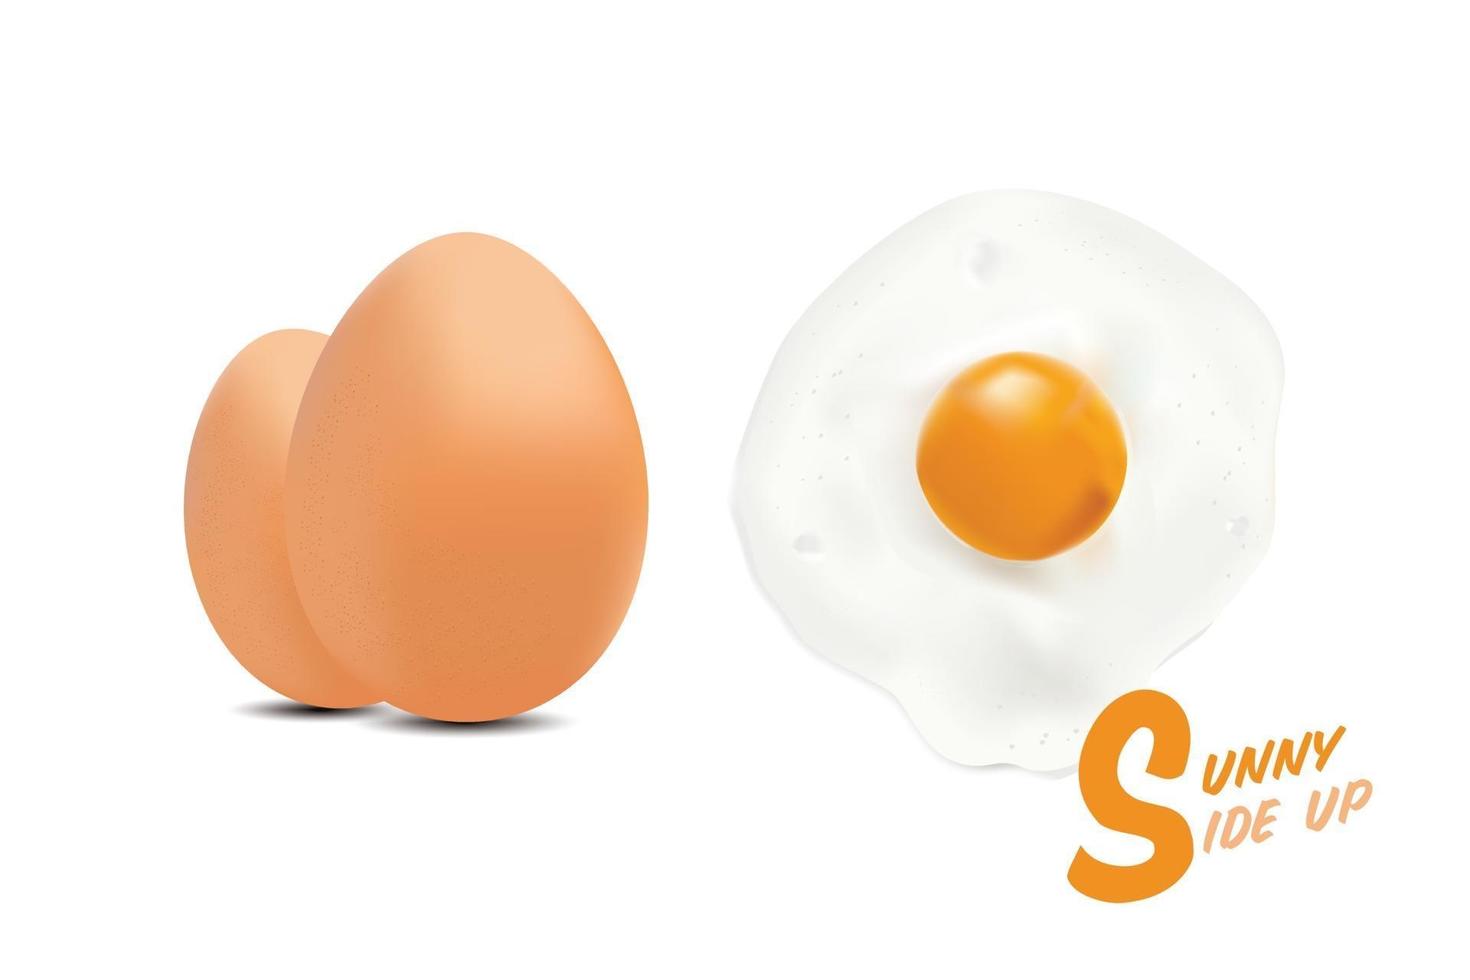 Fried eggs flipped with raw eggs picture, in  over easy basic style level of doneness, vector illustration on white background.